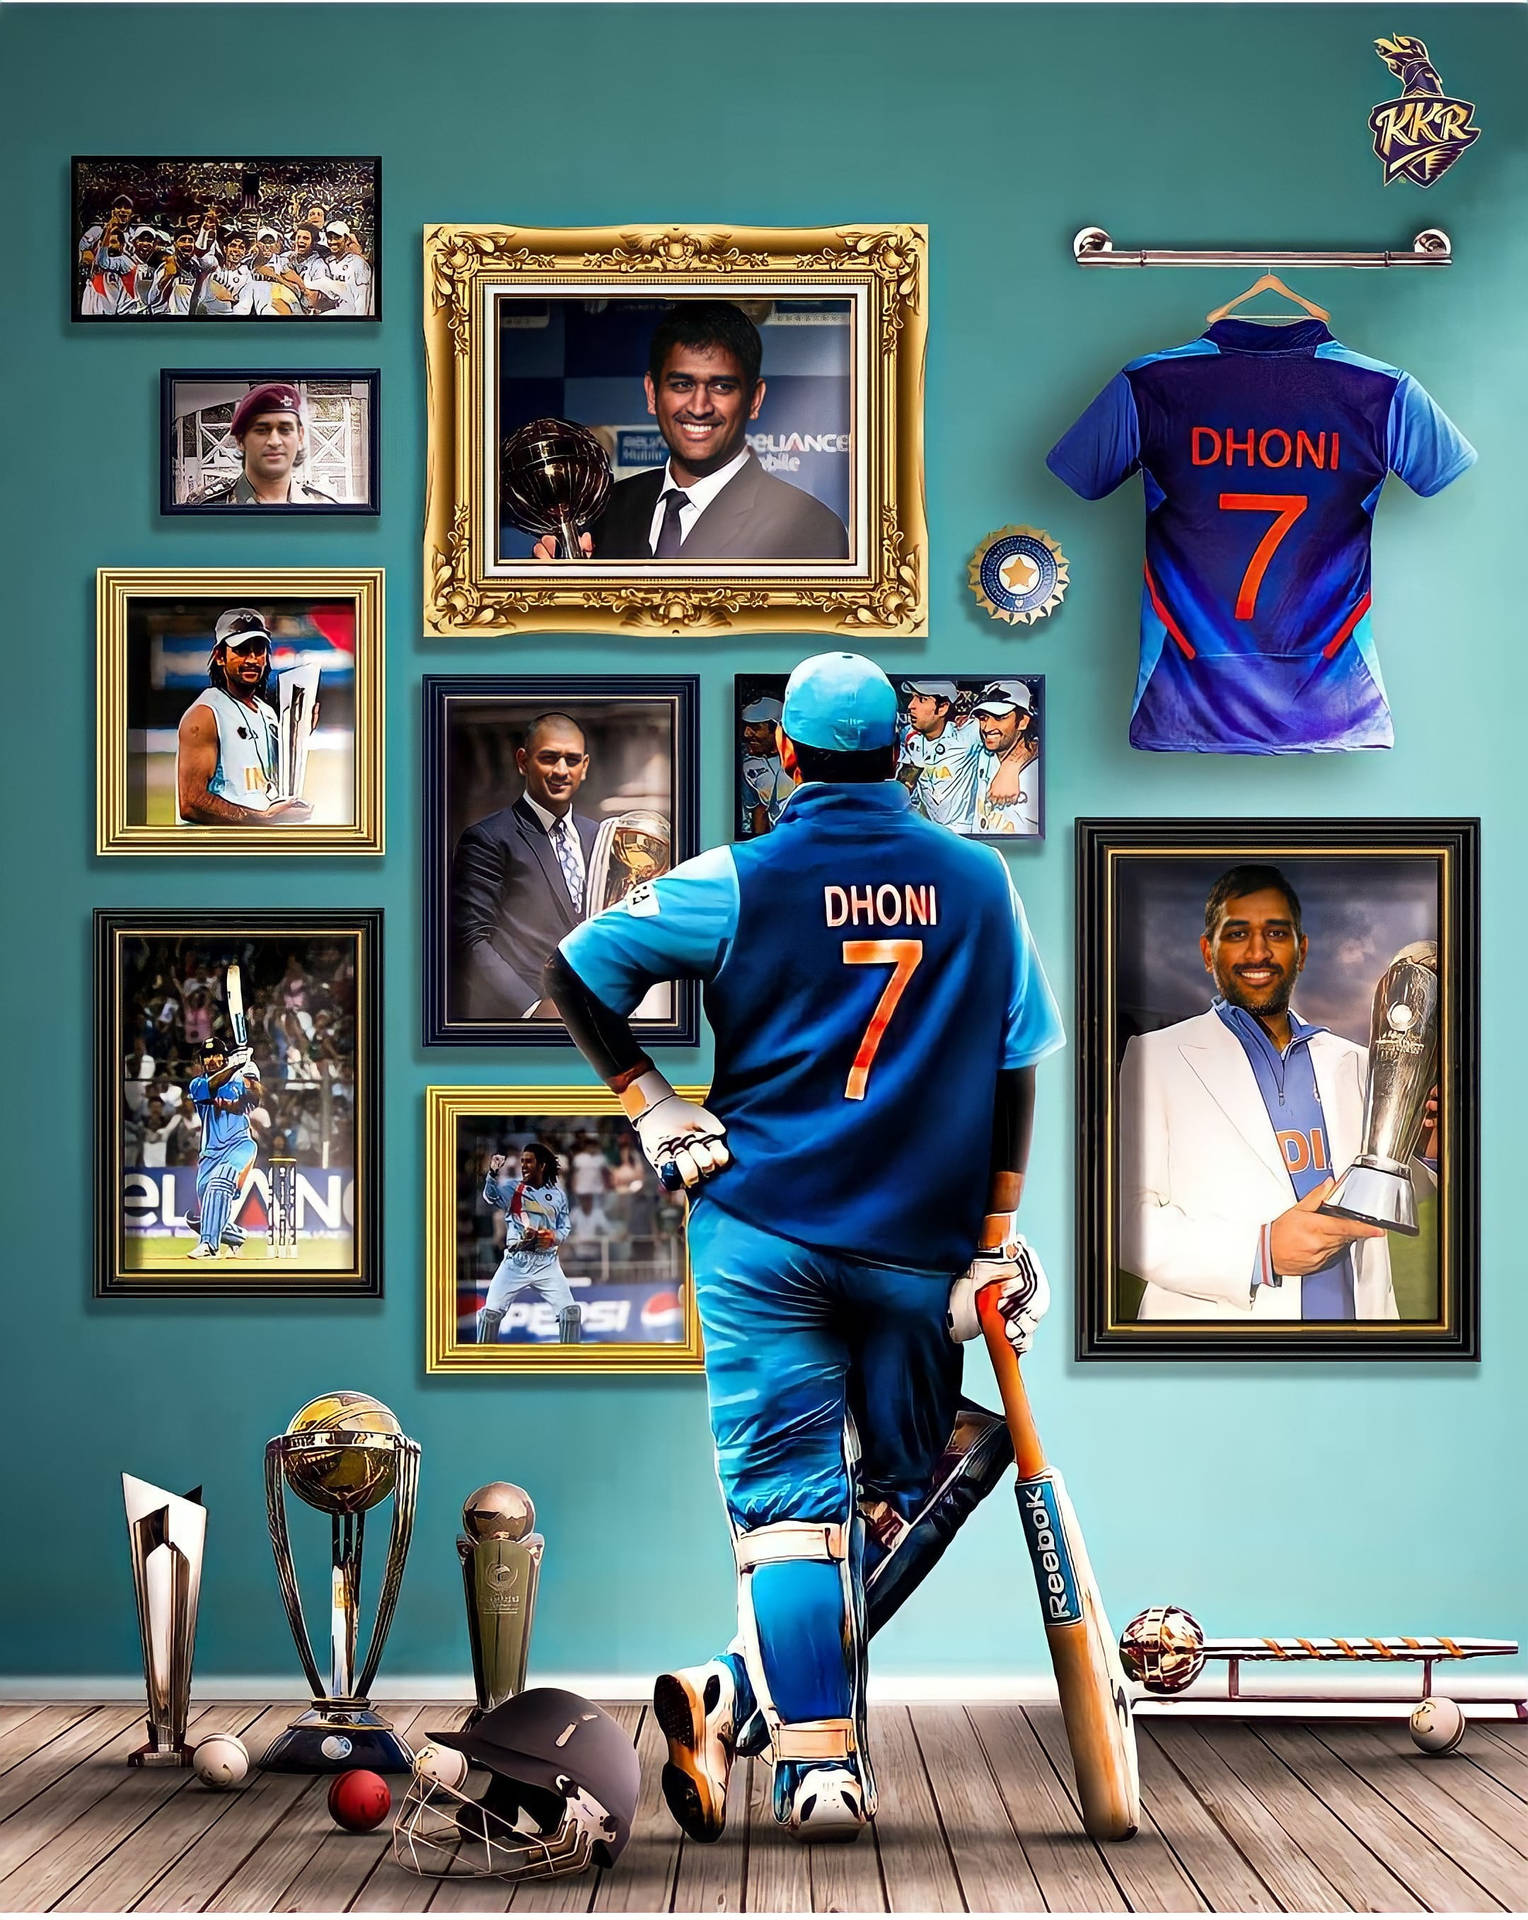 Msd And His Achievements